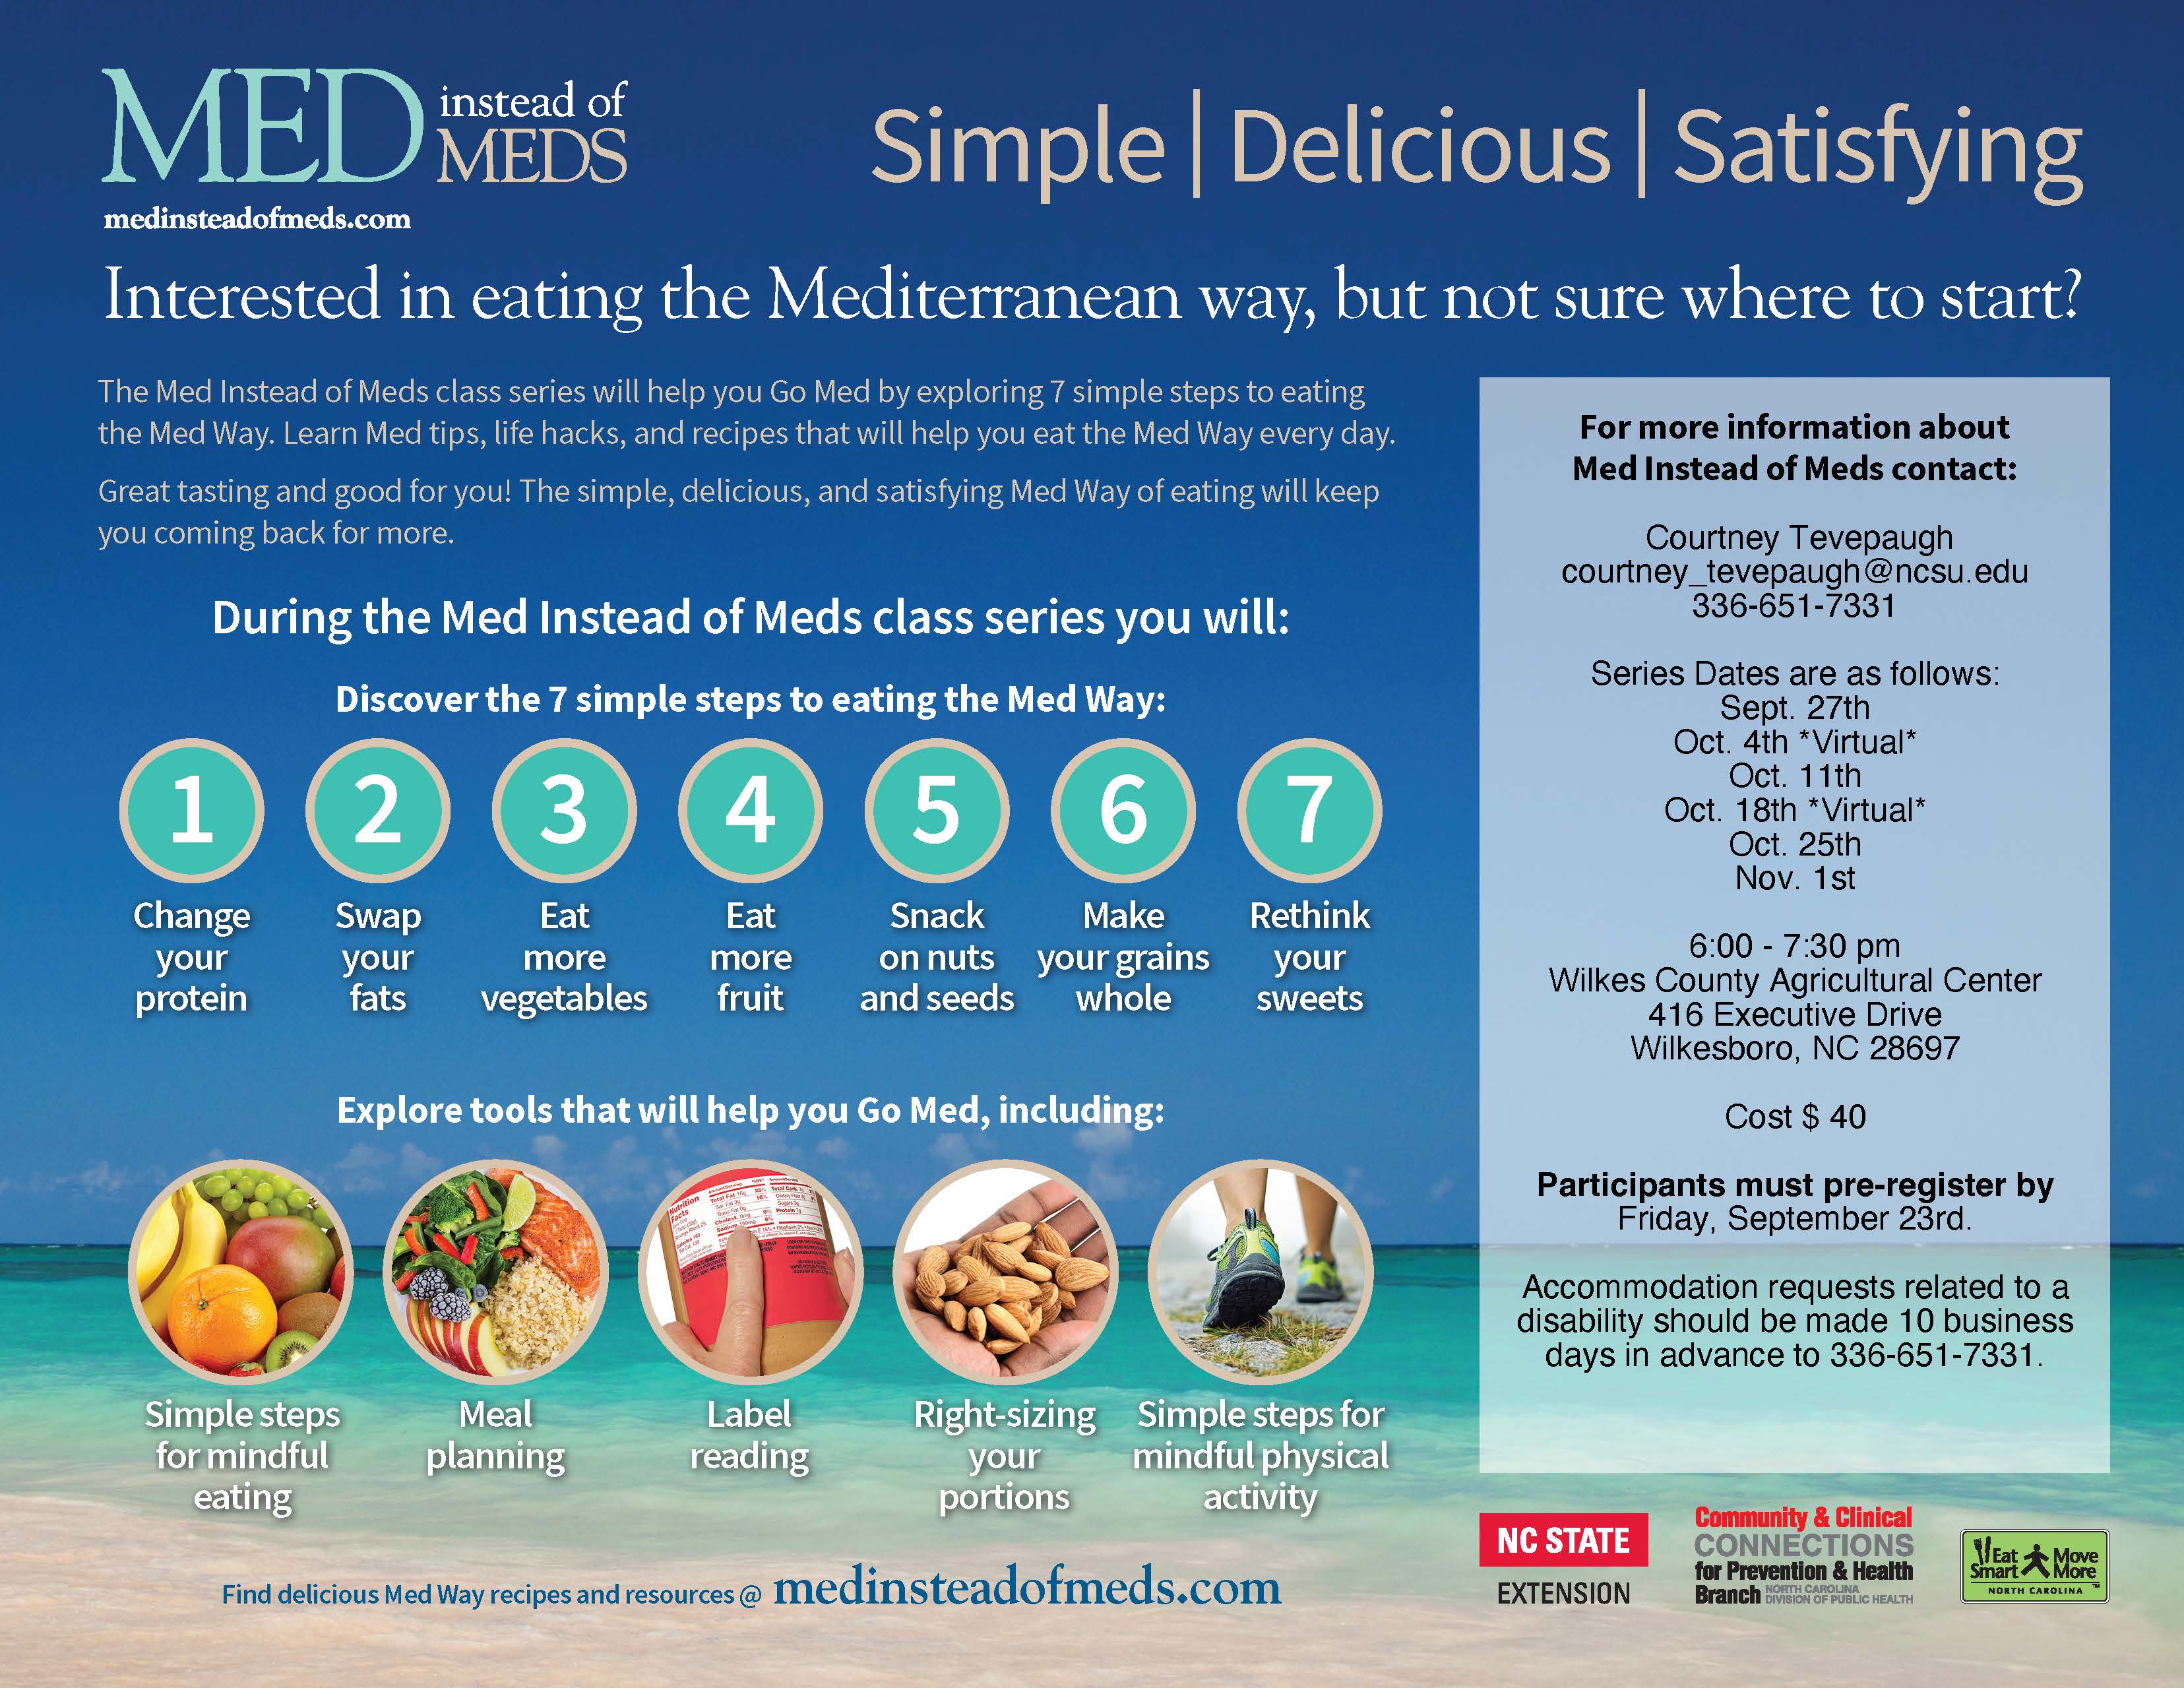 Interested in eating the Mediterranean way, but not sure where to start? The Med instead of Meds class series will help you Go Med by exploring 7 simple steps to eating the Med Way. Learn Med tips, life hacks, and recipes that will help you eat the Med Way every day. Great tasting and good for you! The simple, delicious and satisfying MedWay of eating will keep you coming back for more.